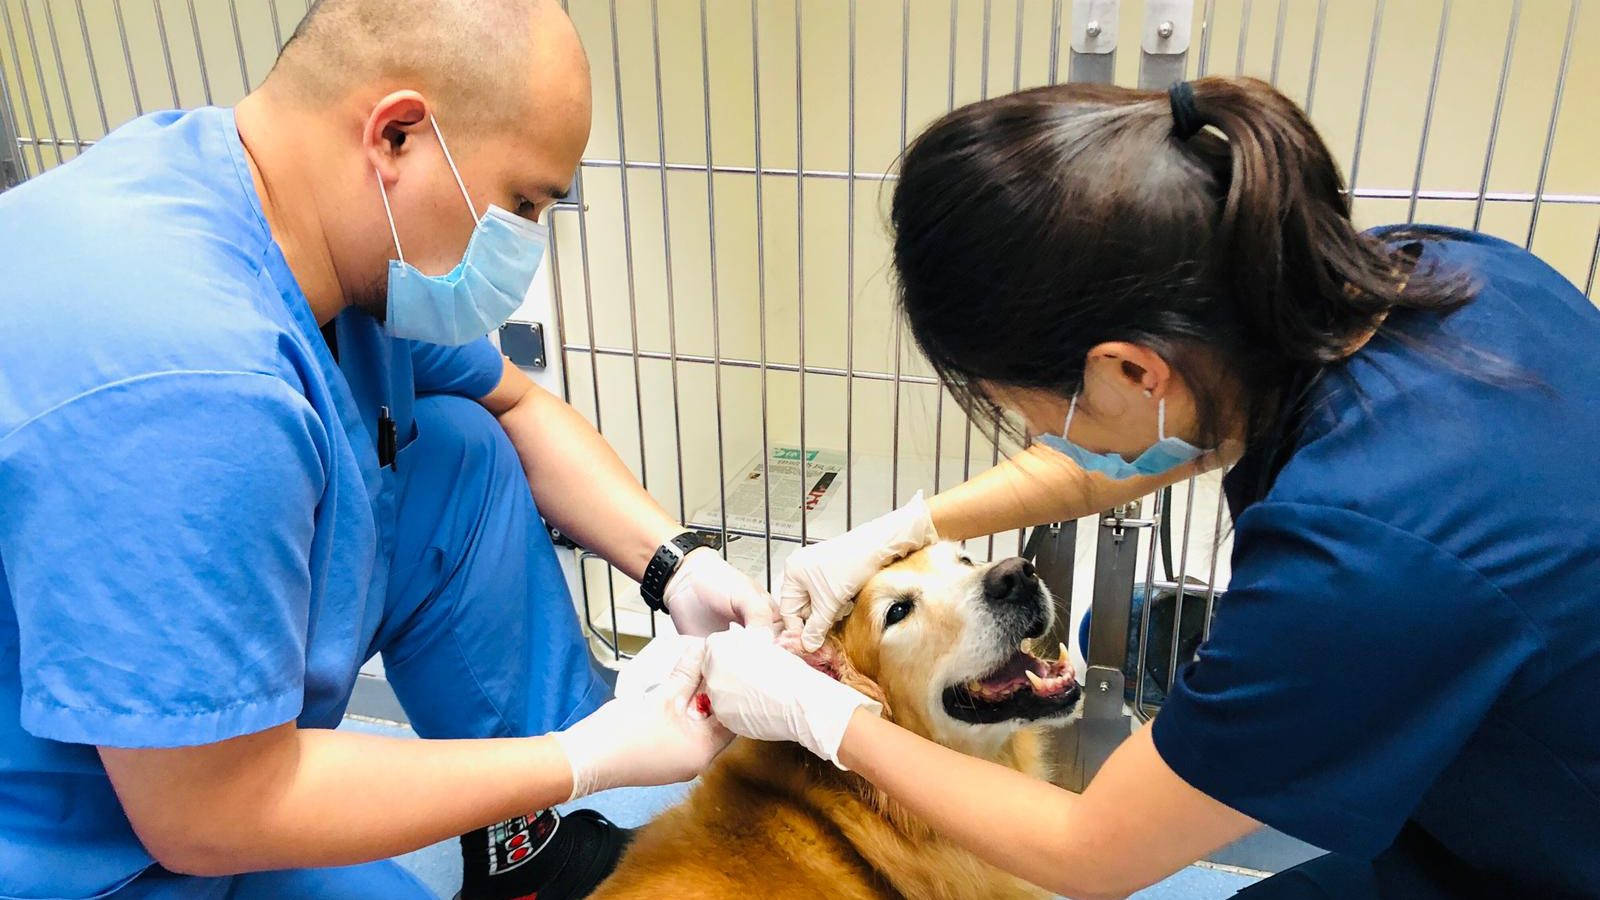 Trusted Veterinarian Examining A Canine Patient Wallpaper